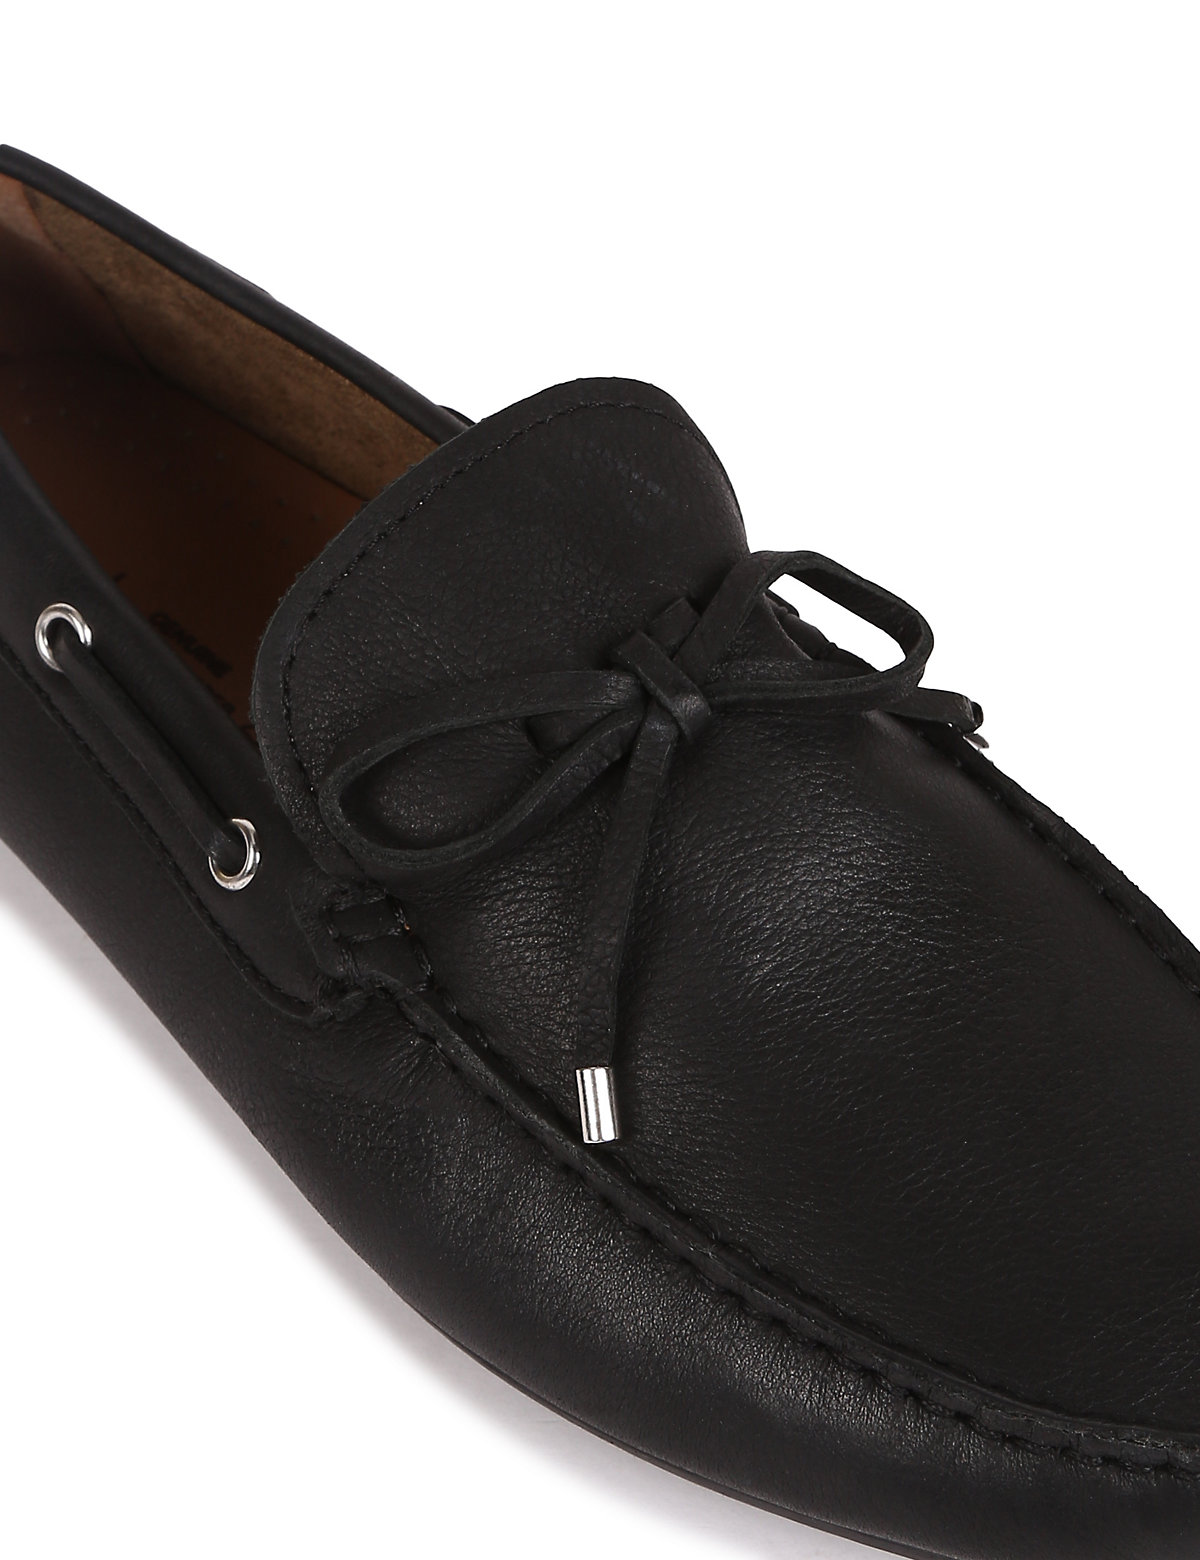 Modena Suede Tassle Loafers